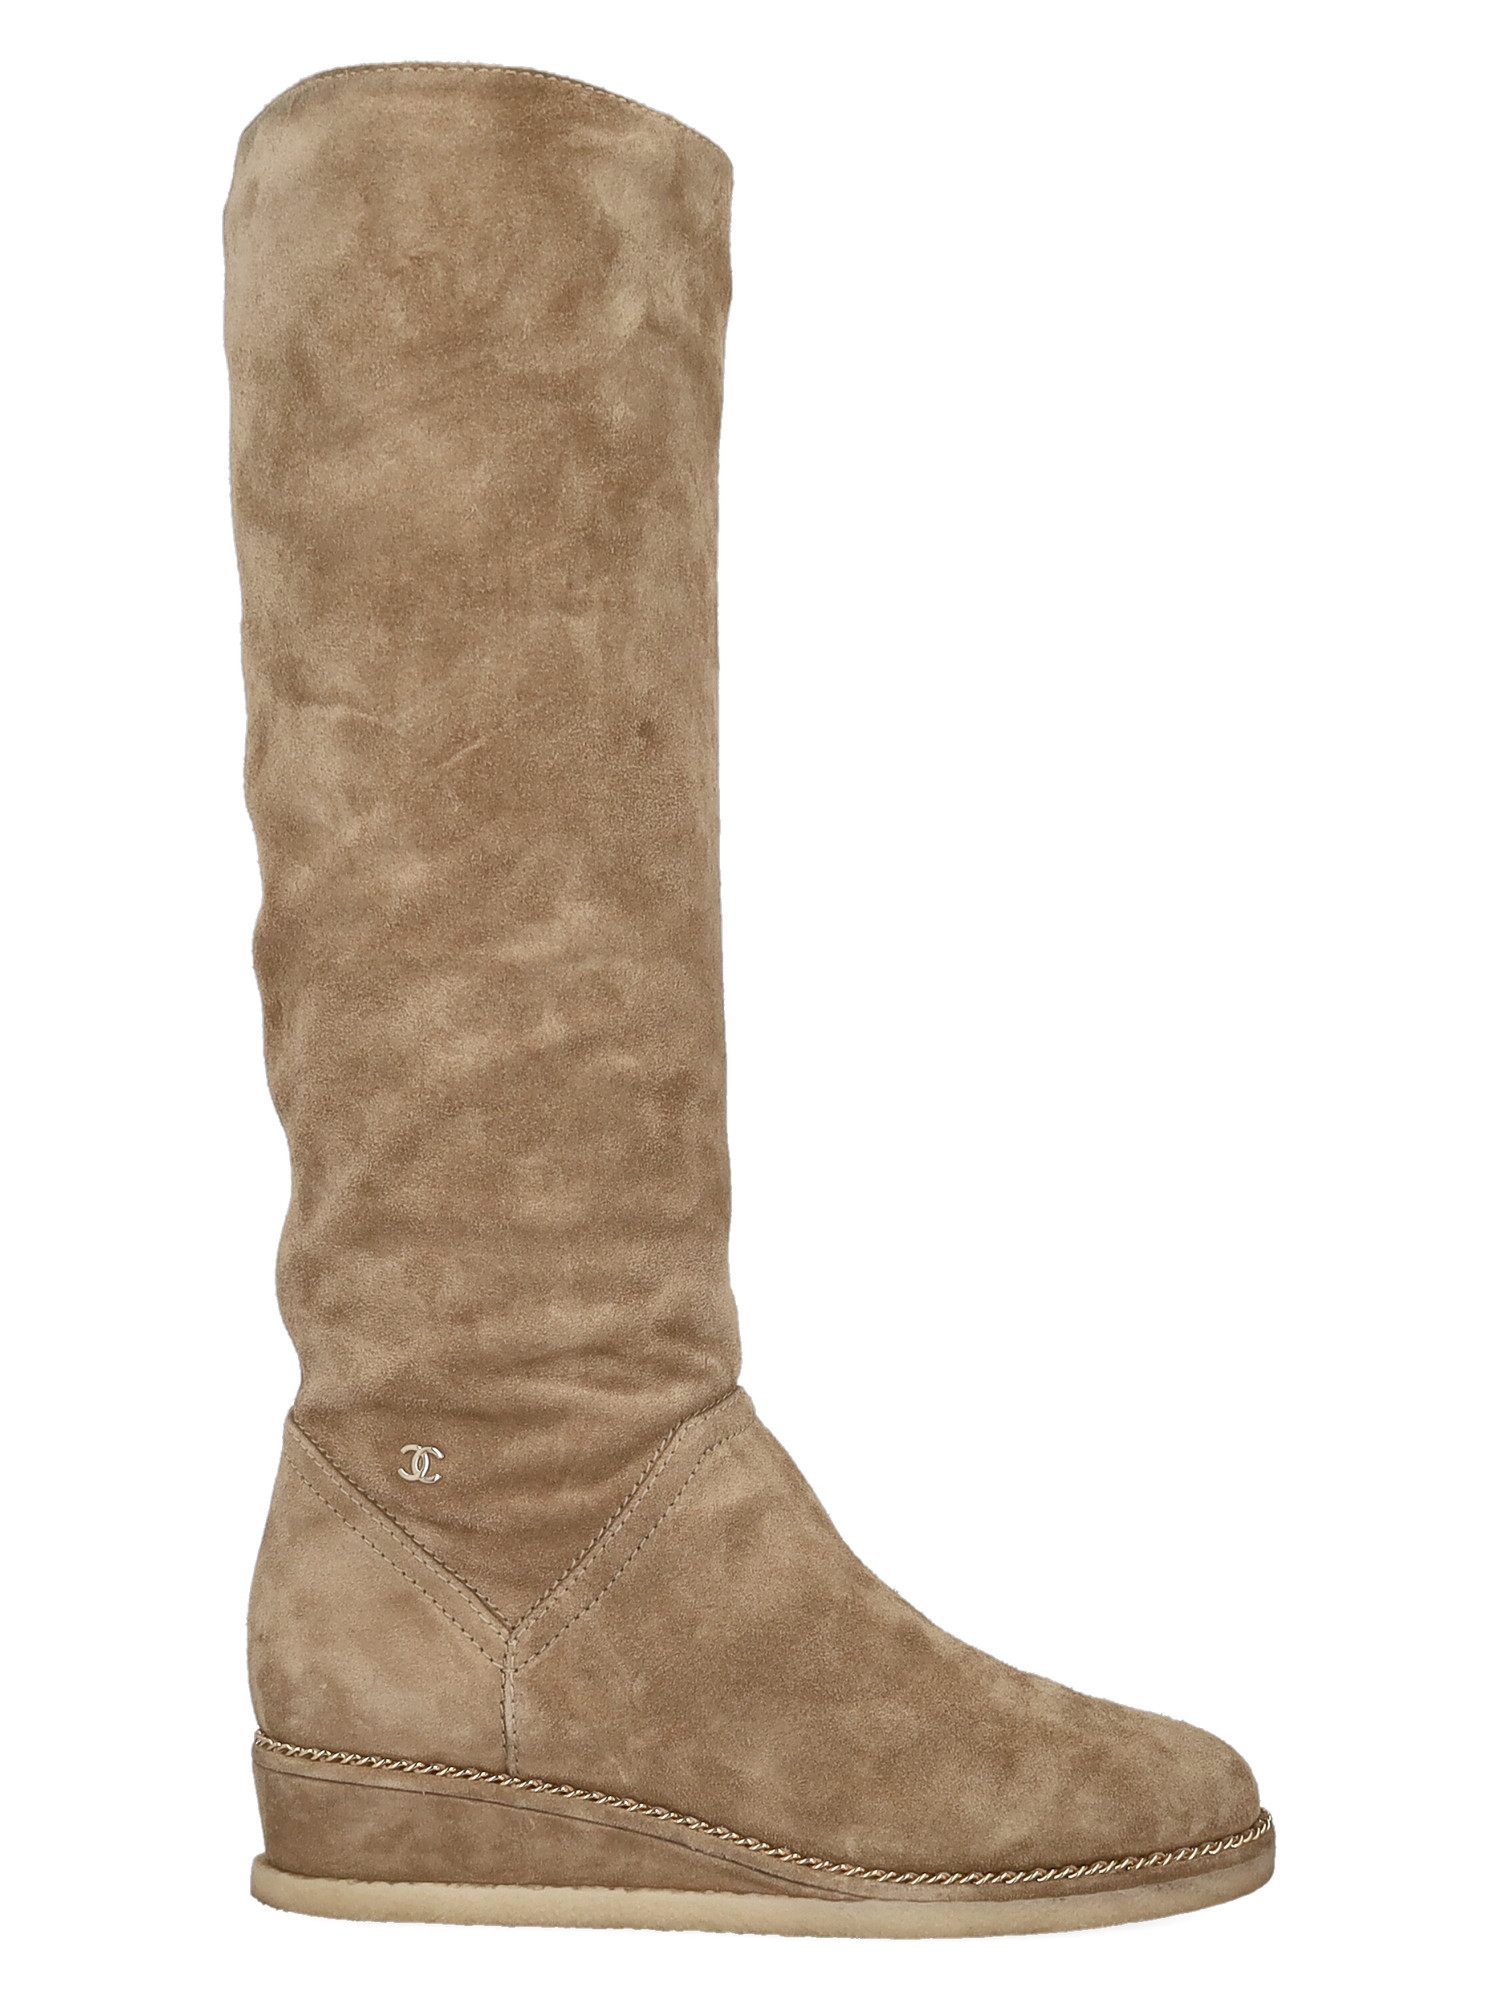 Pre-owned Chanel Women's Boots -  - In Beige Leather